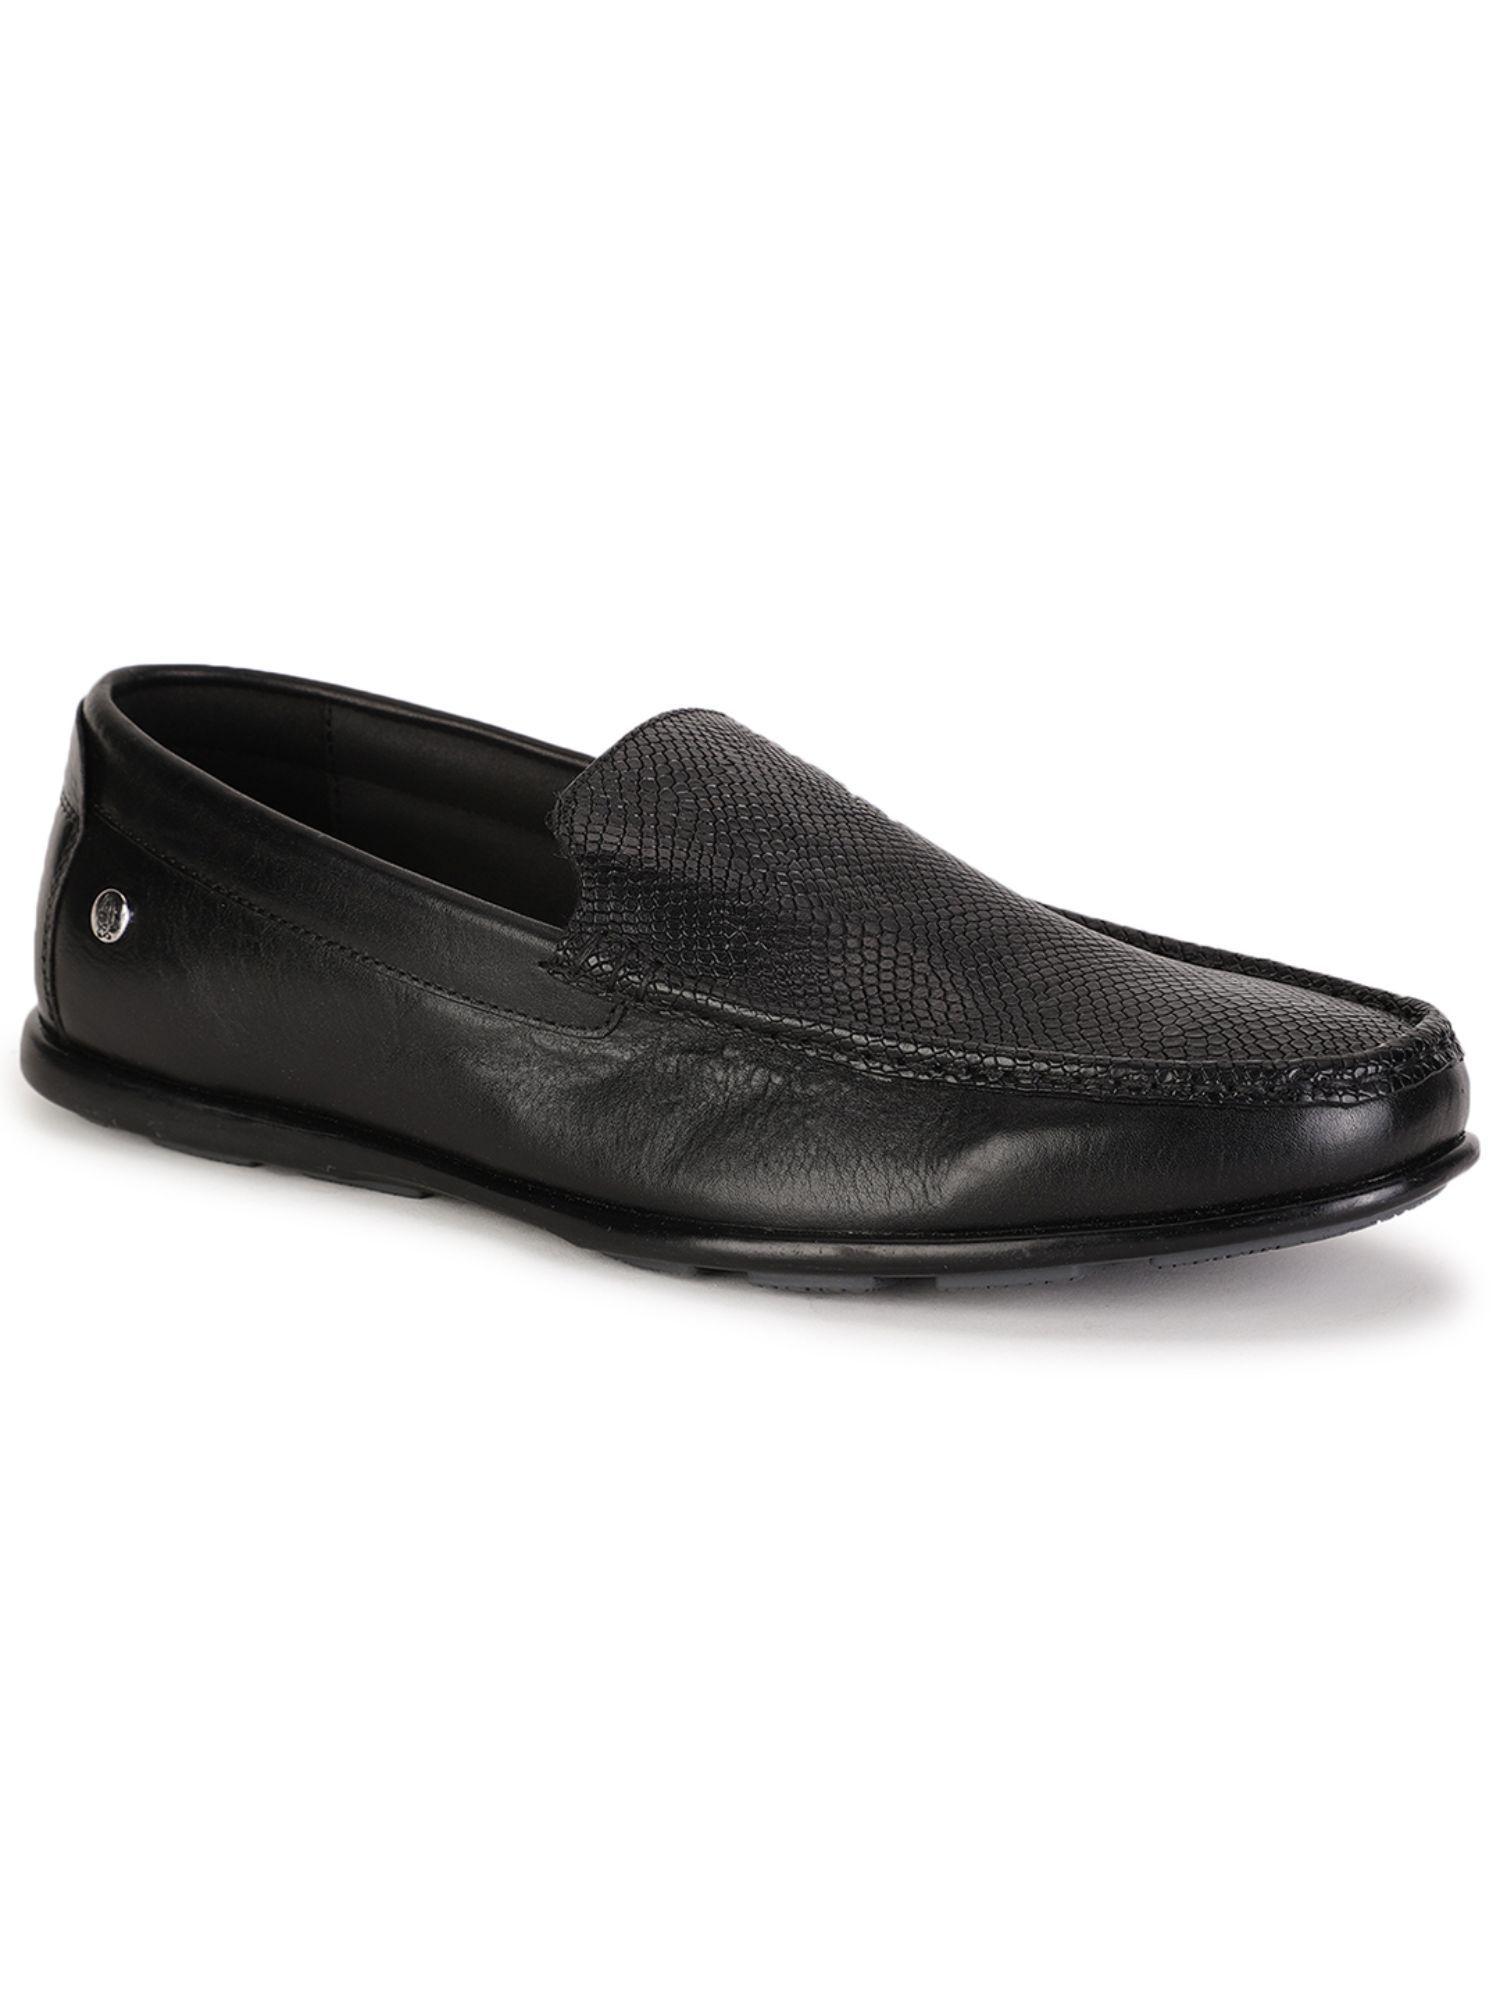 mens-black-slip-on-casual-loafers